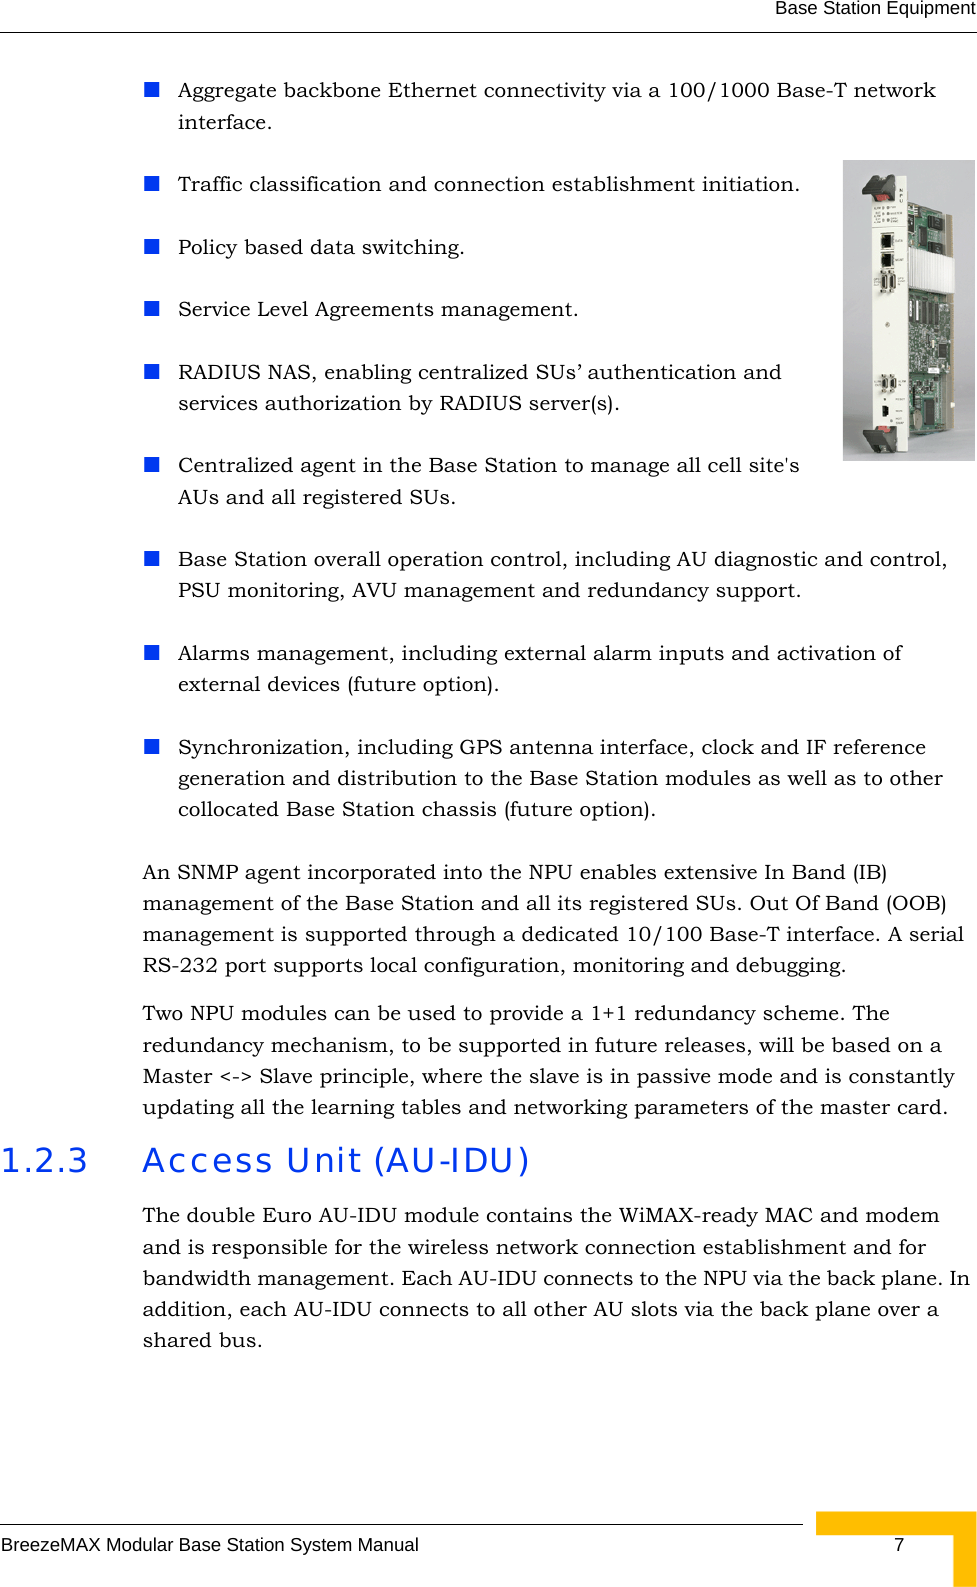 Base Station EquipmentBreezeMAX Modular Base Station System Manual  7Aggregate backbone Ethernet connectivity via a 100/1000 Base-T network interface.Traffic classification and connection establishment initiation.Policy based data switching.Service Level Agreements management.RADIUS NAS, enabling centralized SUs’ authentication and services authorization by RADIUS server(s).Centralized agent in the Base Station to manage all cell site&apos;s AUs and all registered SUs.Base Station overall operation control, including AU diagnostic and control, PSU monitoring, AVU management and redundancy support.Alarms management, including external alarm inputs and activation of external devices (future option).Synchronization, including GPS antenna interface, clock and IF reference generation and distribution to the Base Station modules as well as to other collocated Base Station chassis (future option).An SNMP agent incorporated into the NPU enables extensive In Band (IB) management of the Base Station and all its registered SUs. Out Of Band (OOB) management is supported through a dedicated 10/100 Base-T interface. A serial RS-232 port supports local configuration, monitoring and debugging.Two NPU modules can be used to provide a 1+1 redundancy scheme. The redundancy mechanism, to be supported in future releases, will be based on a Master &lt;-&gt; Slave principle, where the slave is in passive mode and is constantly updating all the learning tables and networking parameters of the master card.1.2.3 Access Unit (AU-IDU)The double Euro AU-IDU module contains the WiMAX-ready MAC and modem and is responsible for the wireless network connection establishment and for bandwidth management. Each AU-IDU connects to the NPU via the back plane. In addition, each AU-IDU connects to all other AU slots via the back plane over a shared bus.